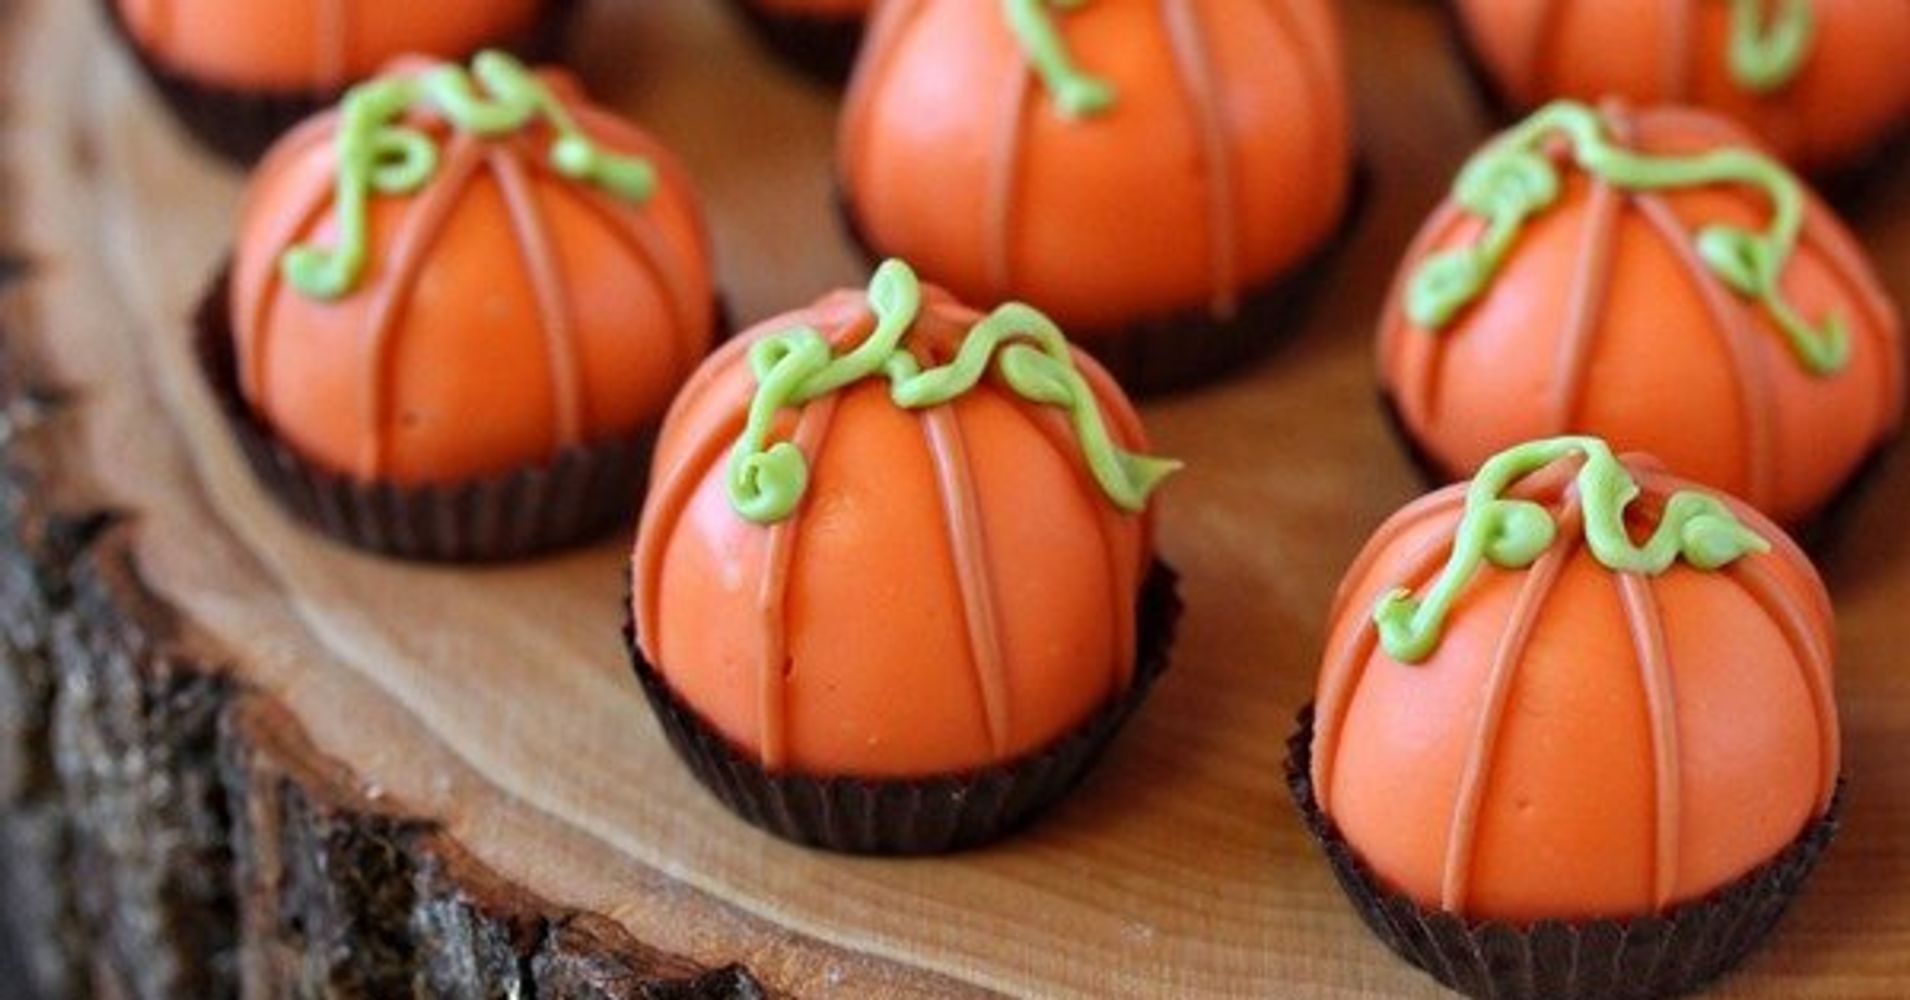 The Cutest Halloween Recipes Ever. No Blood Or Gore Here. | HuffPost